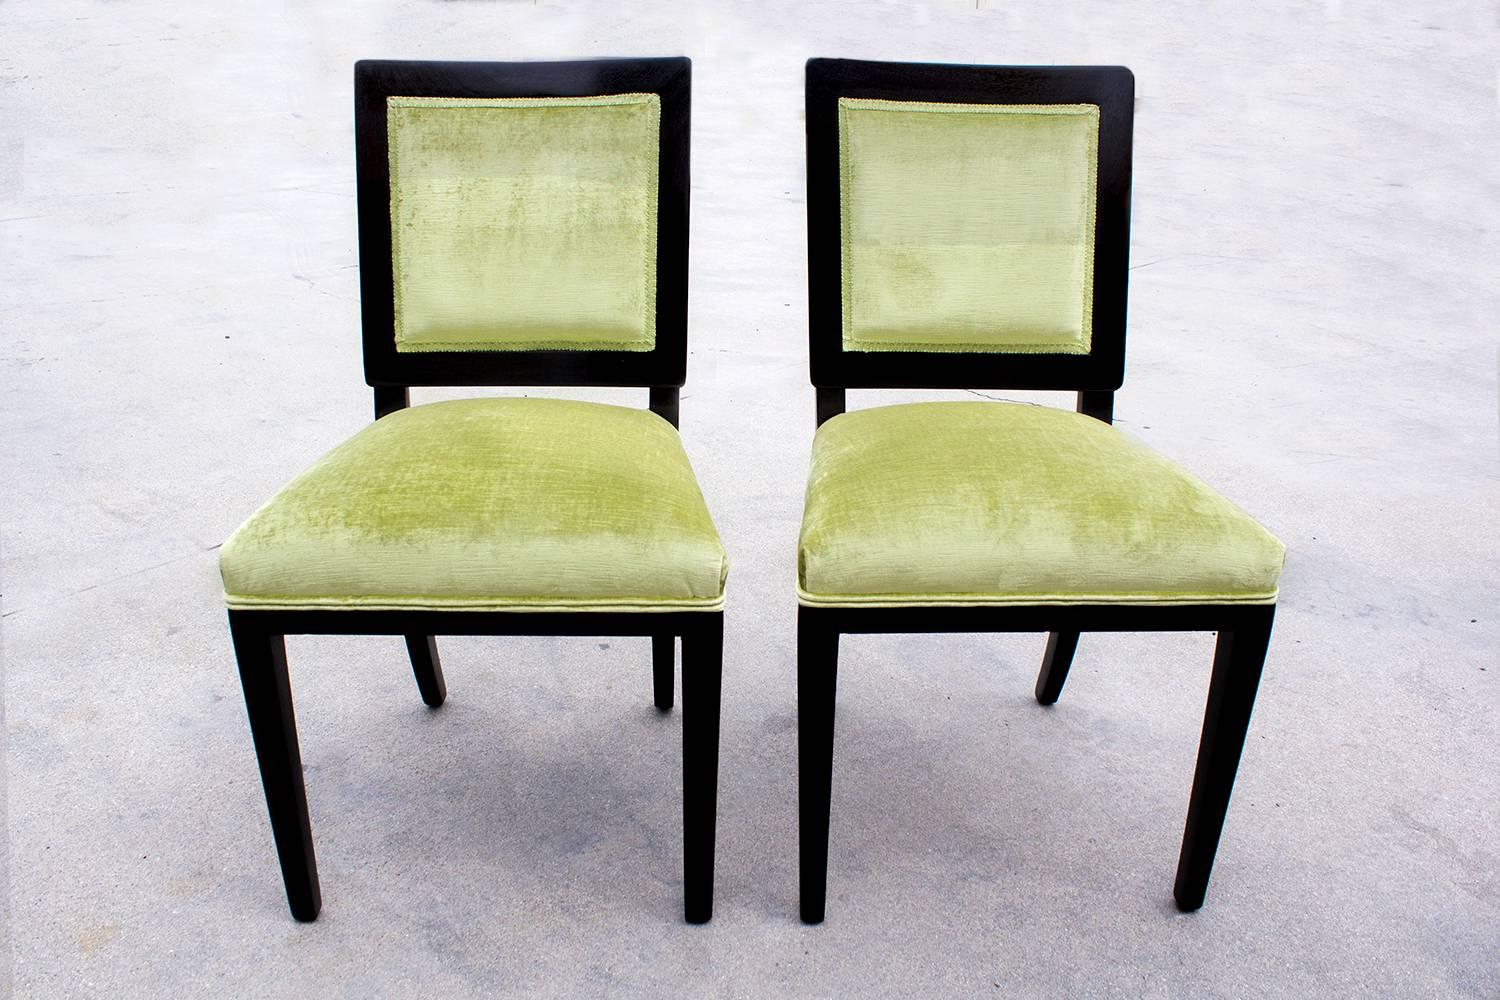 Pair of lovely Dunbar dining chairs, circa 1940. Refinished in dark walnut and reupholstered seats in Brussels velvet. Excellent refinished condition.

Dimensions: 20